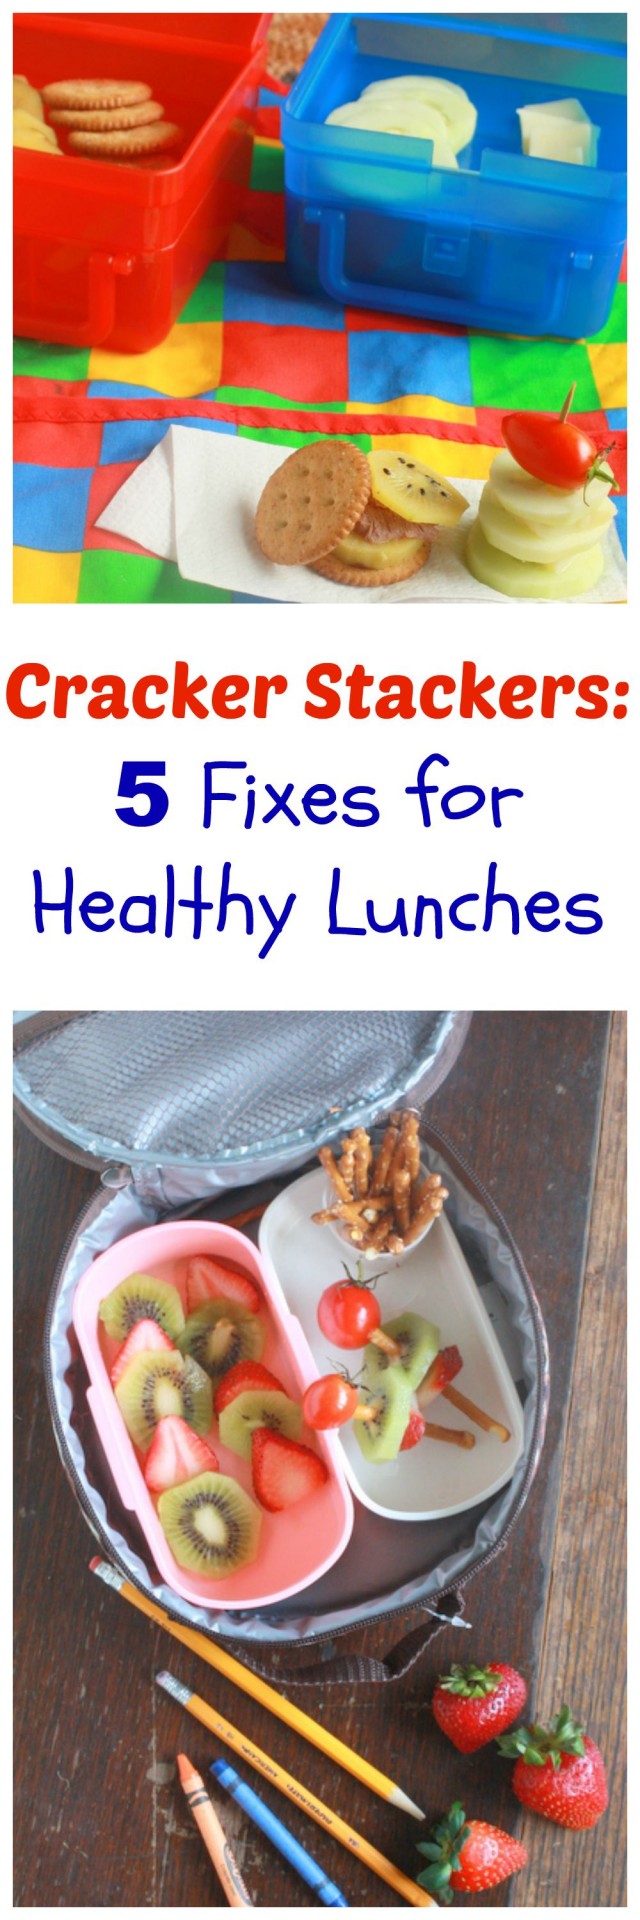 5 Fixes for Healthy Lunches : Cracker Stackers | TeaspoonOfSpice.com #kids